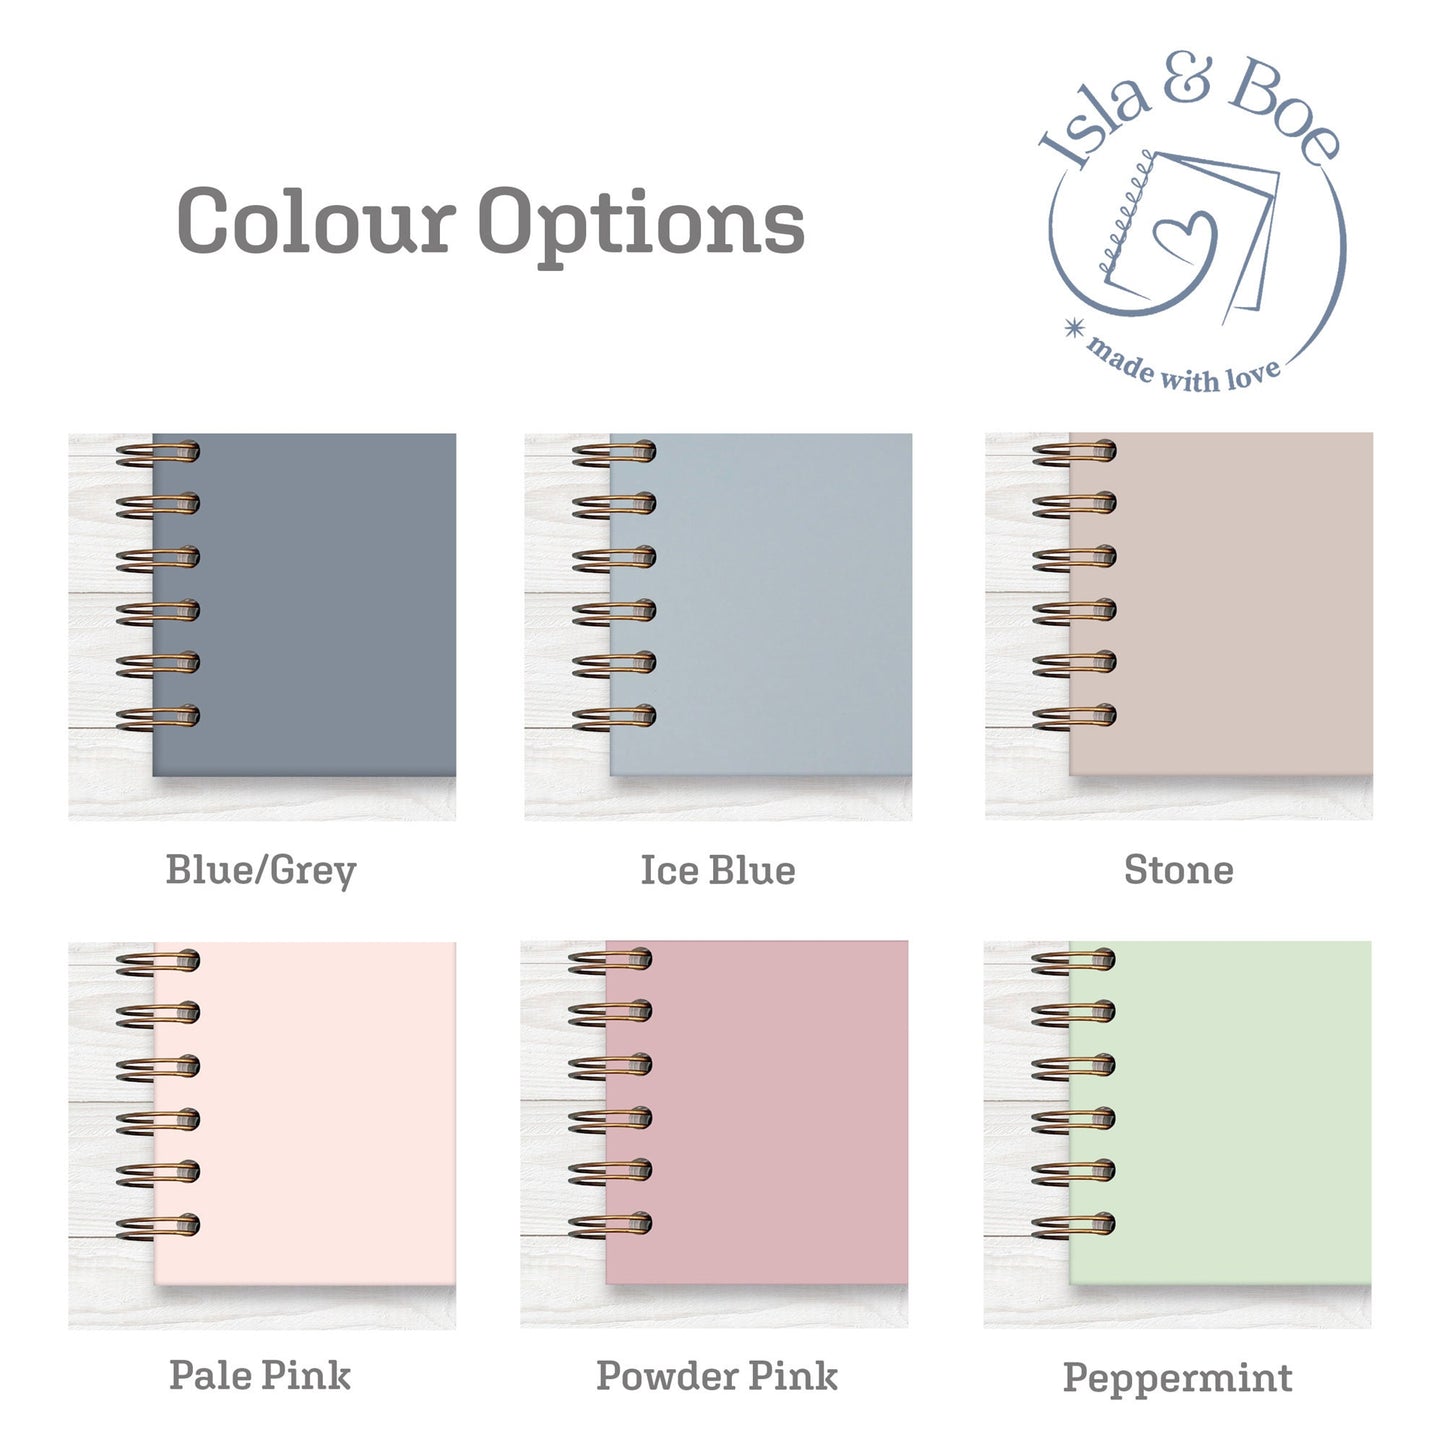 Acolour chart showing the sample colurs of the options for the book cover colours. There is Blue/Grey, Ice Blue, Stone, Pale Pink, Powder Pink and Peppermint